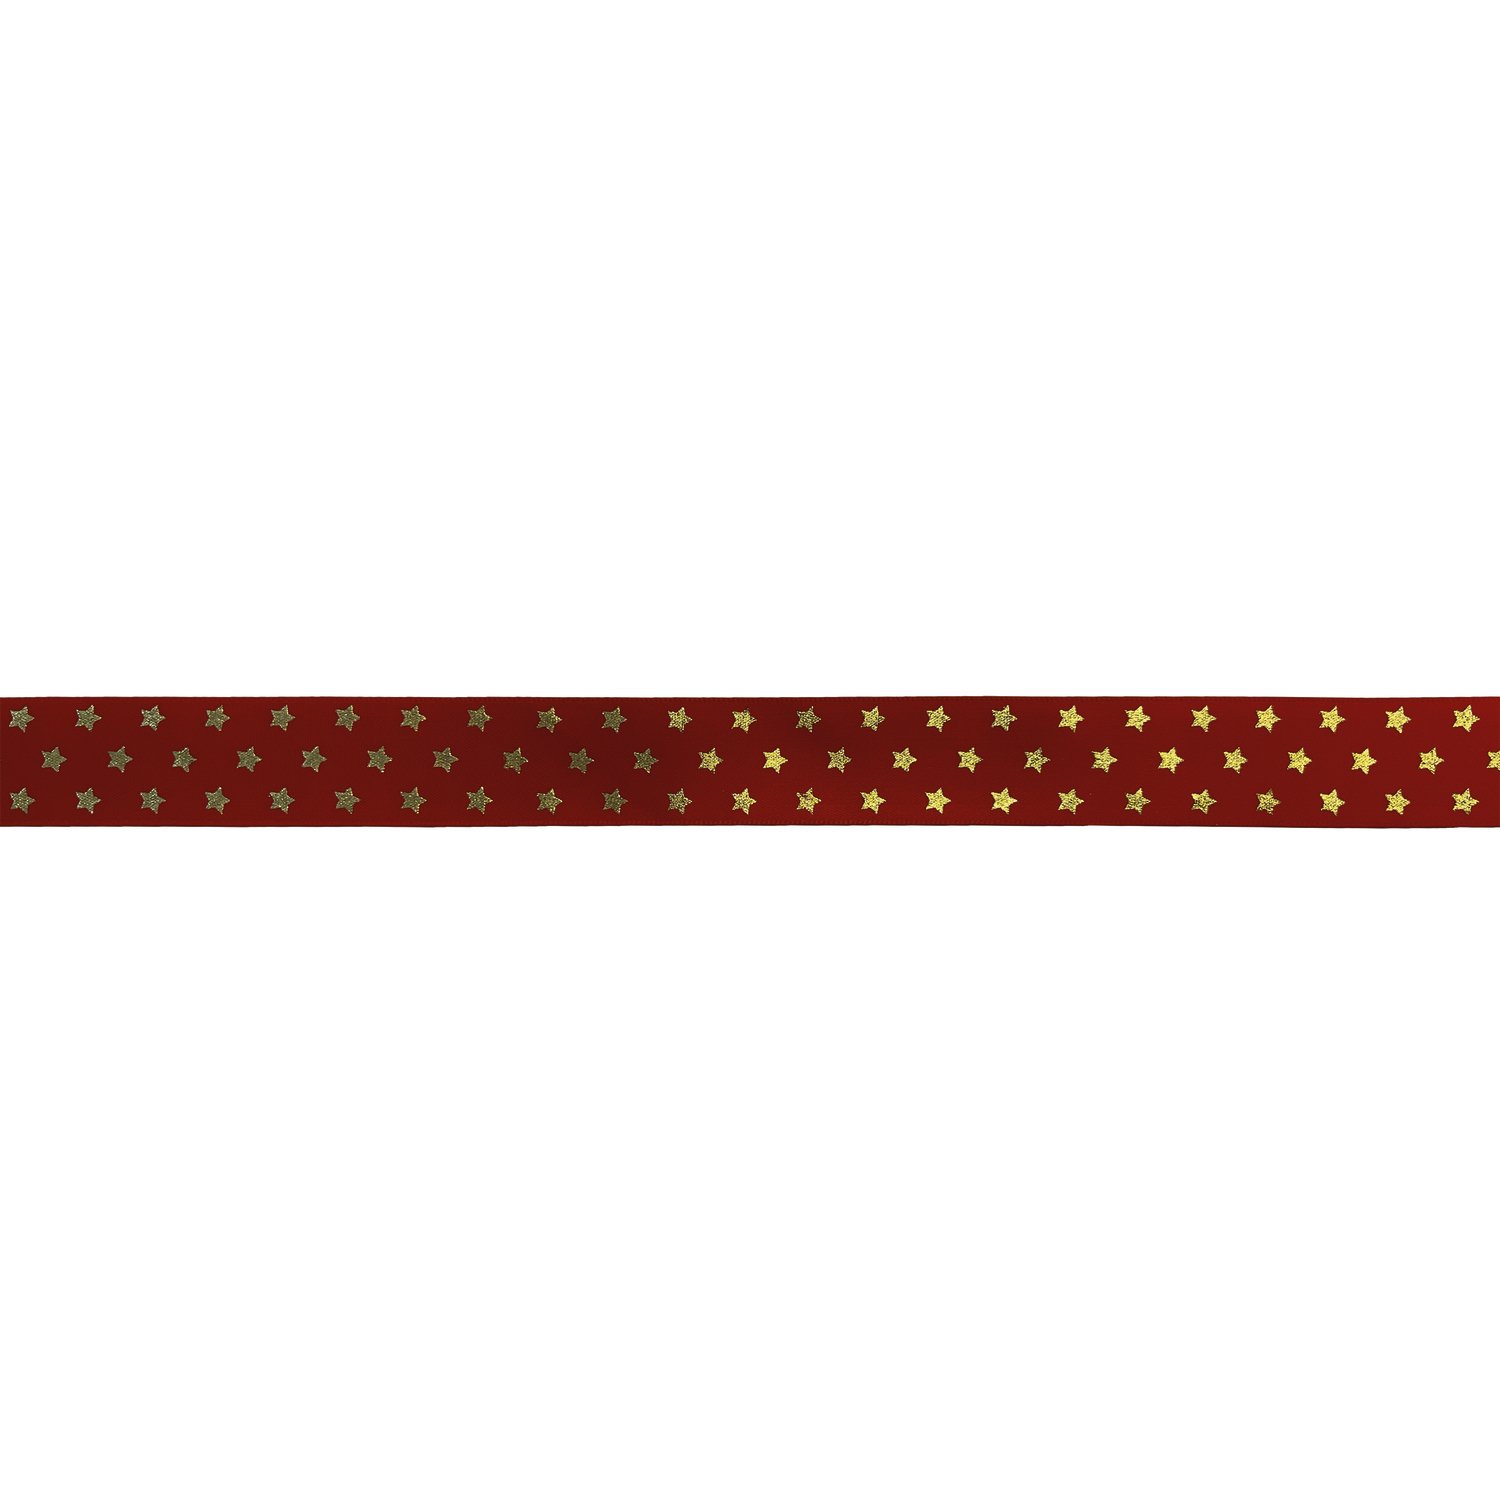 Red single faced satin ribbon with gold twinkling stars - 23mmx25m